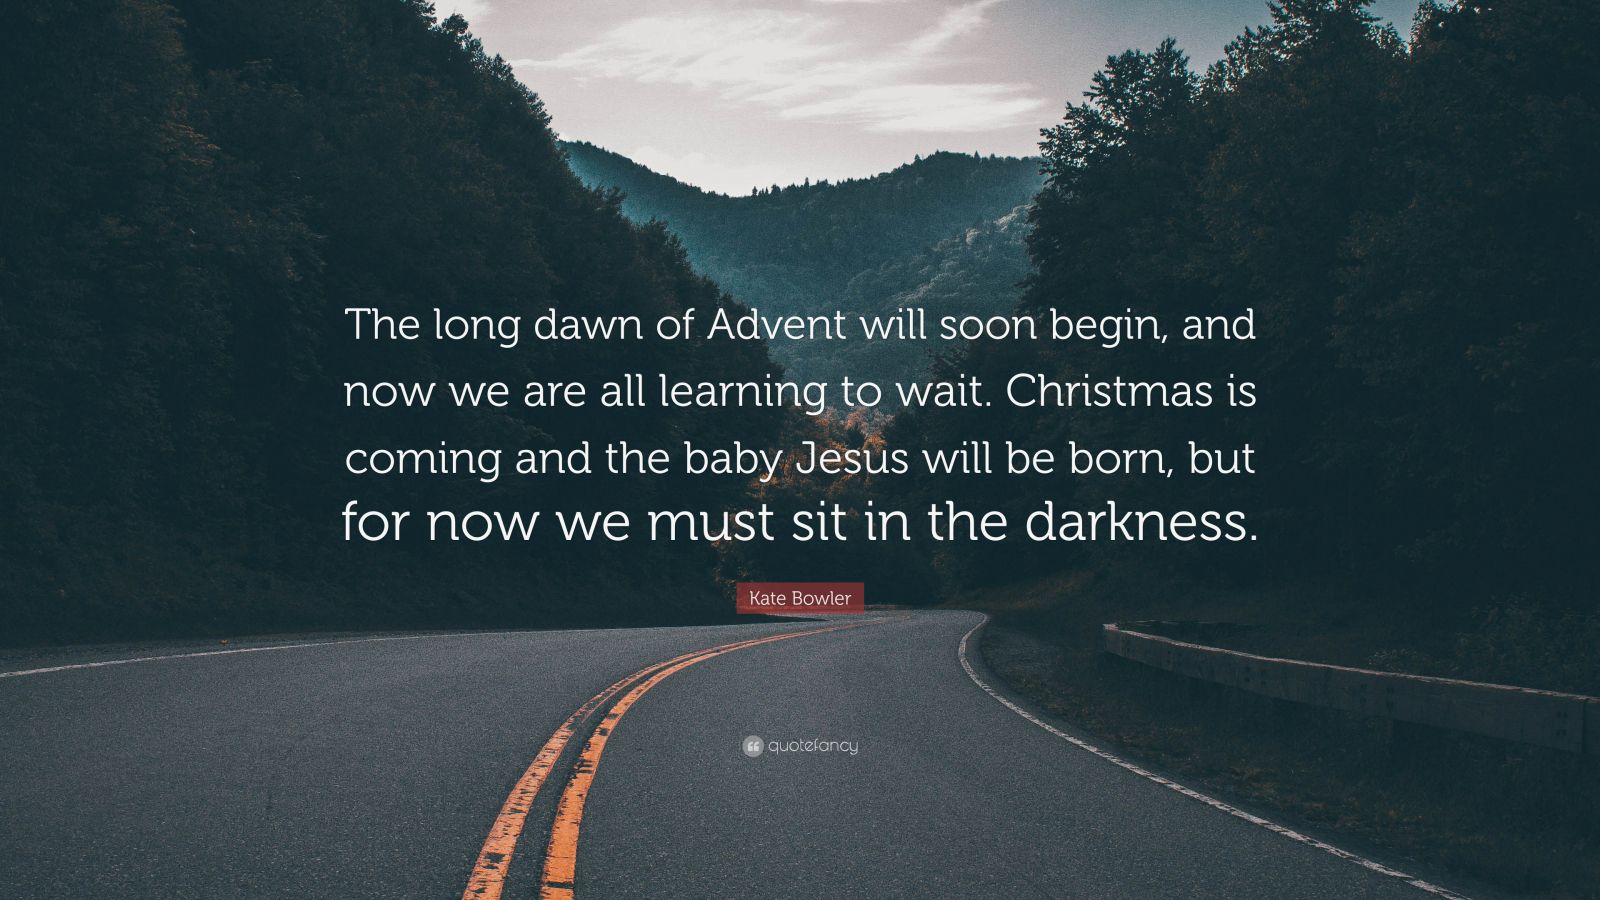 Kate Bowler Quote “The long dawn of Advent will soon begin, and now we